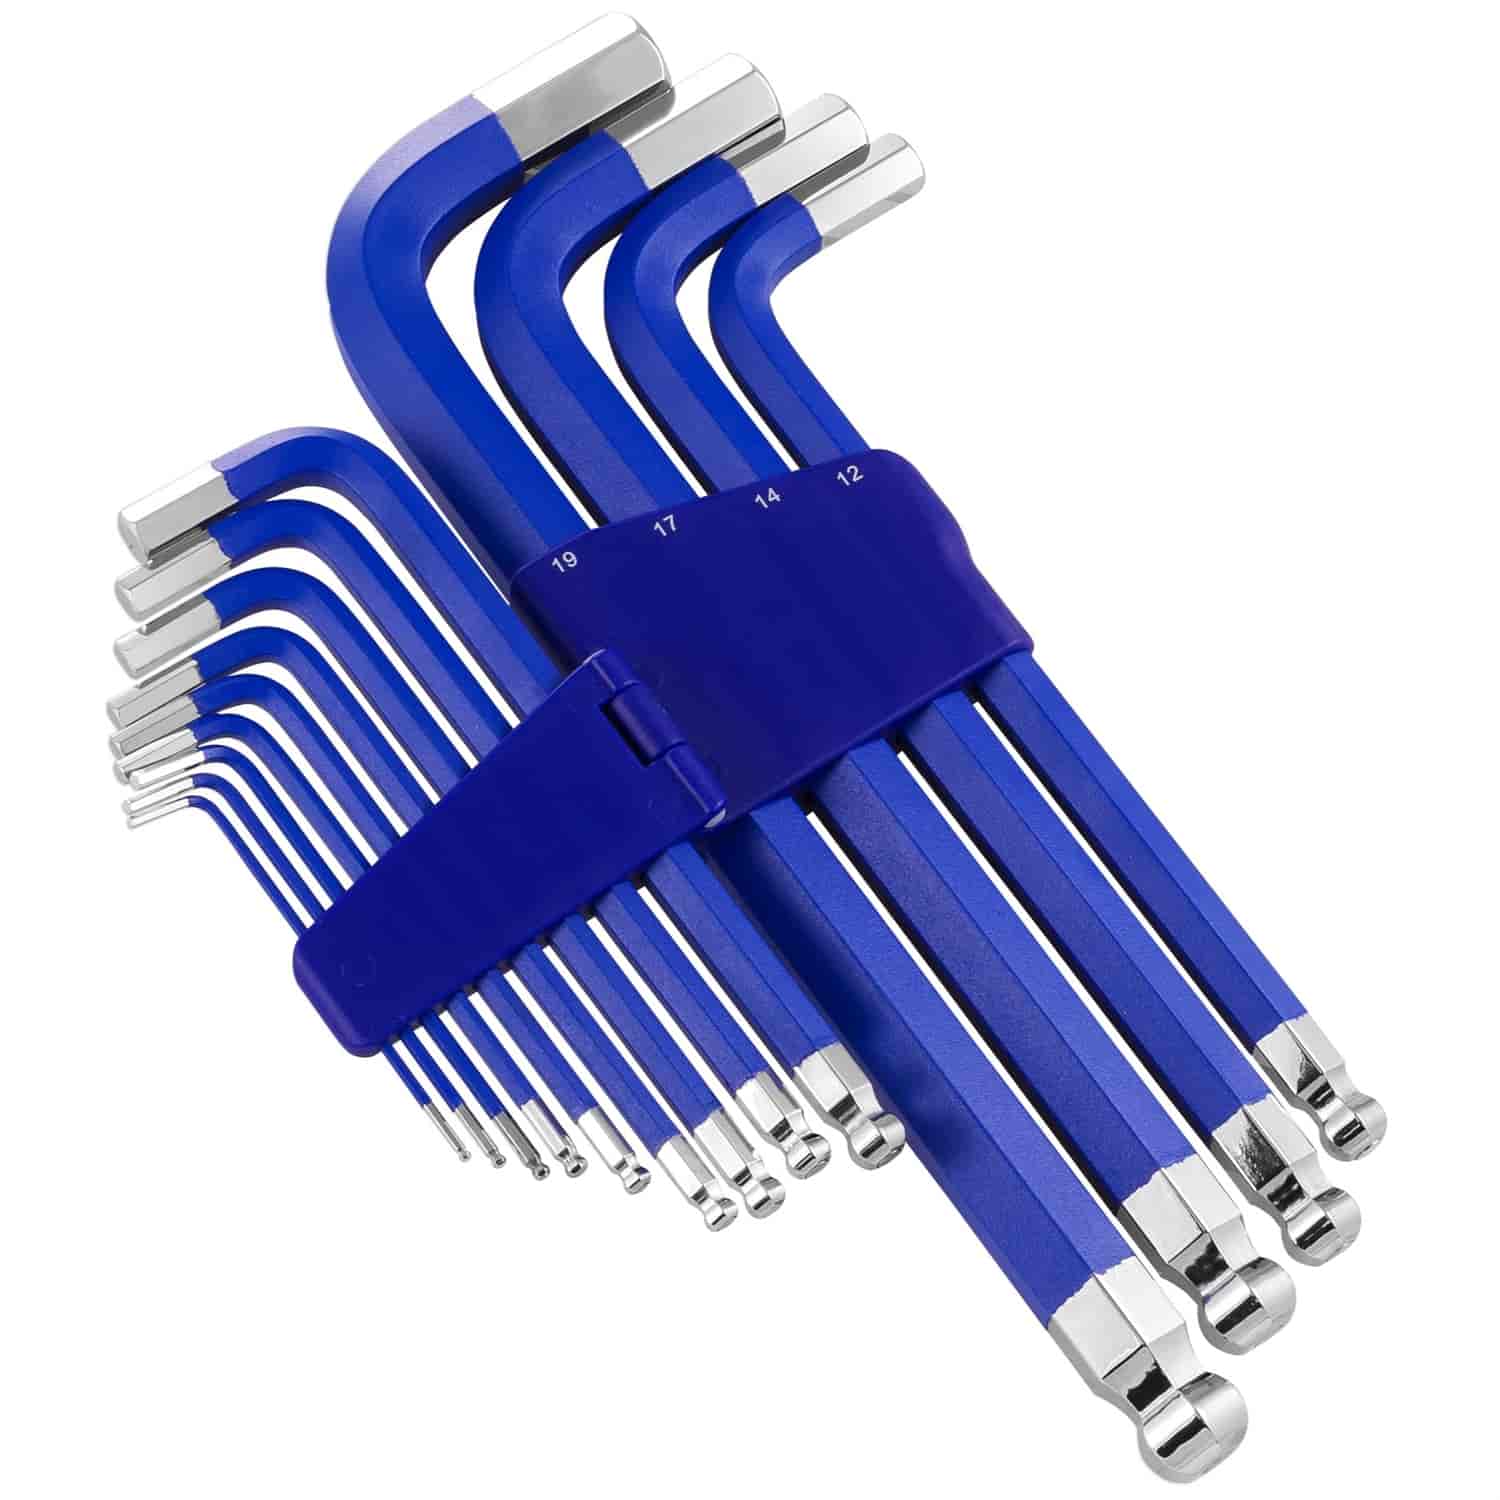 13PC HEX KEY WRENCH